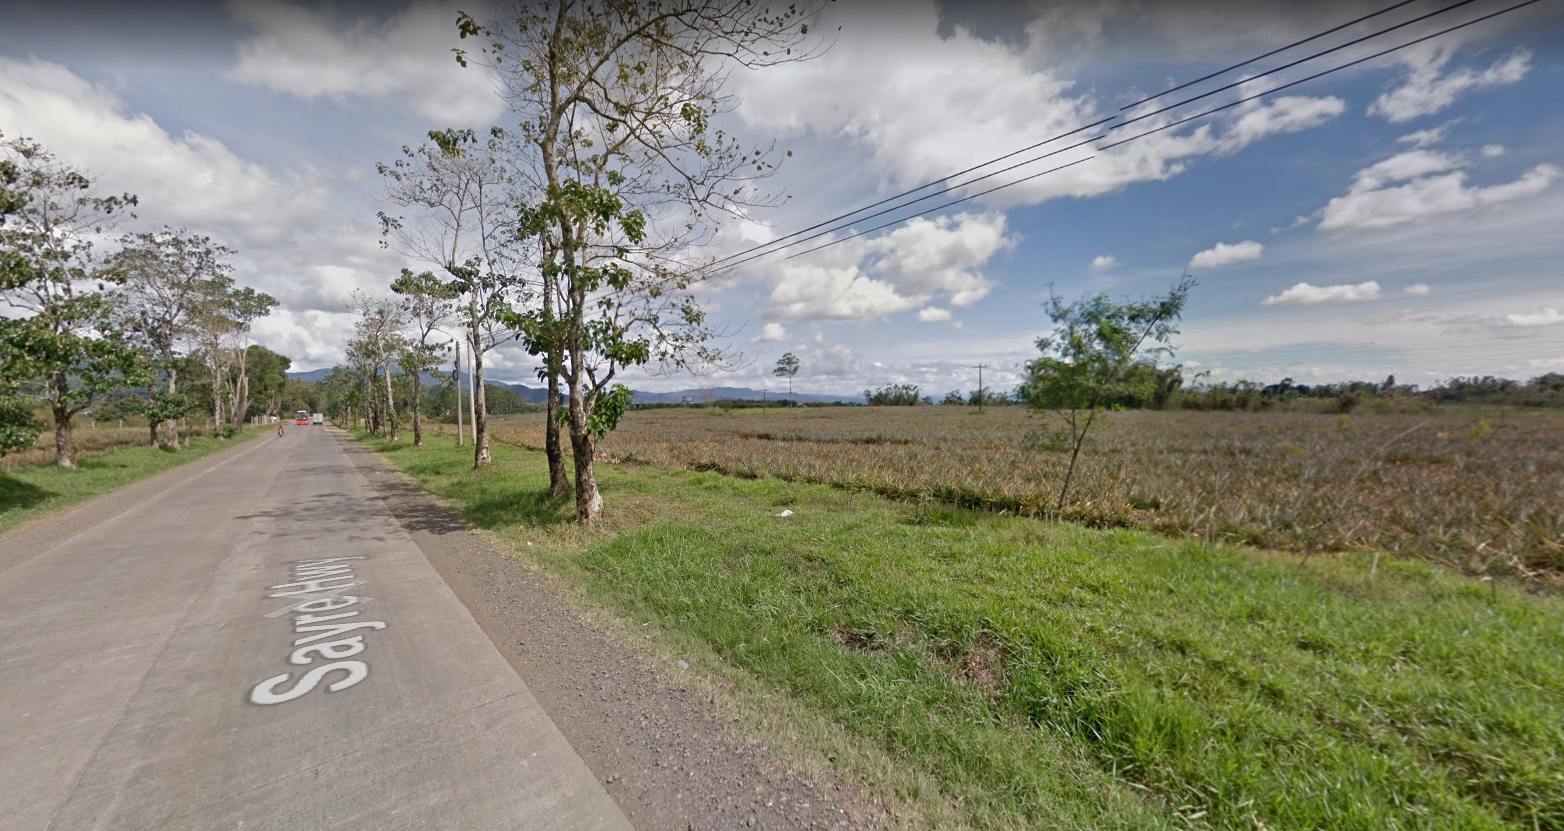 Land for Development in Patpat, Malaybalay Bukidnon Philippines